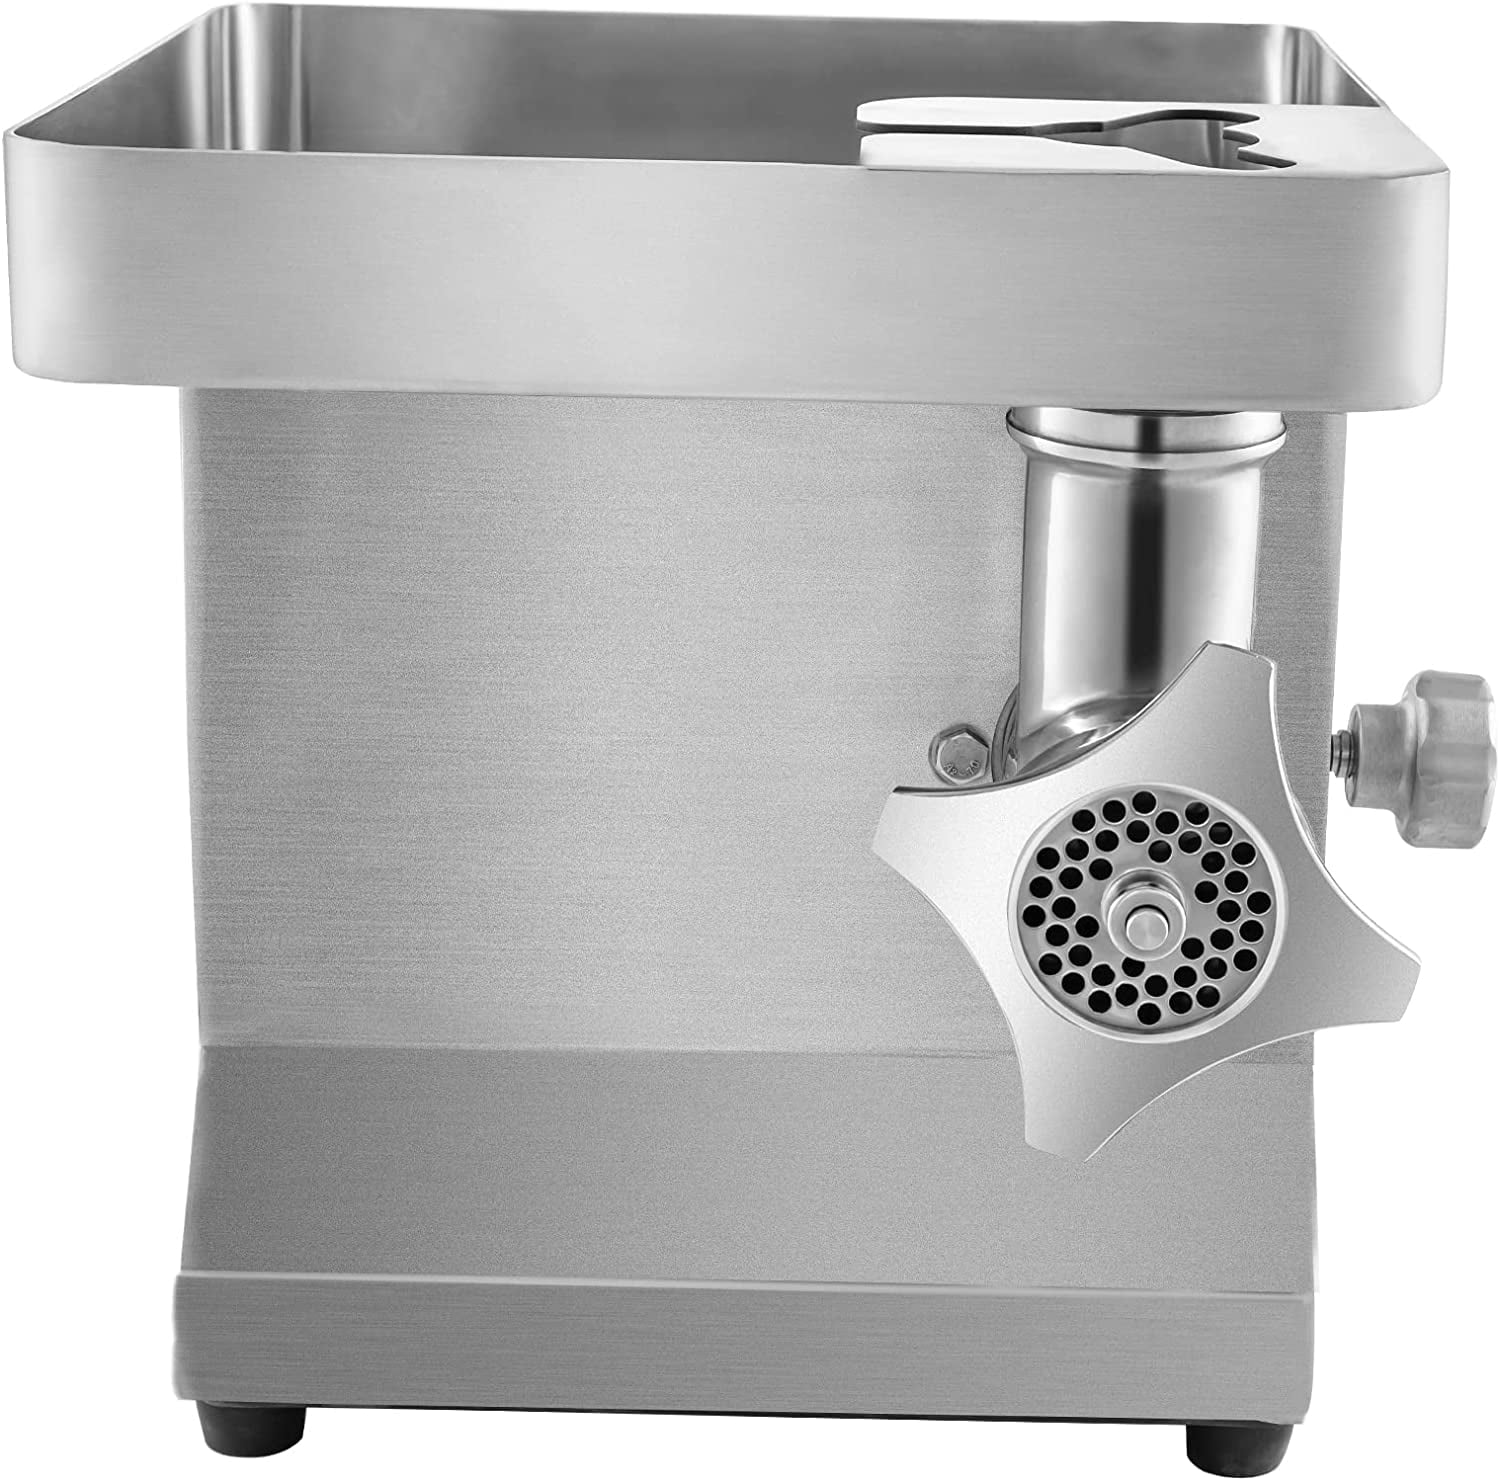 VEVOR 1100-Watt Silver Electric Meat Grinder 550 lbs./Hour Commercial  Sausage Stuffer Maker 1.5-HP for Industrial and Home Use  1100WJRJ90800X001V1 - The Home Depot